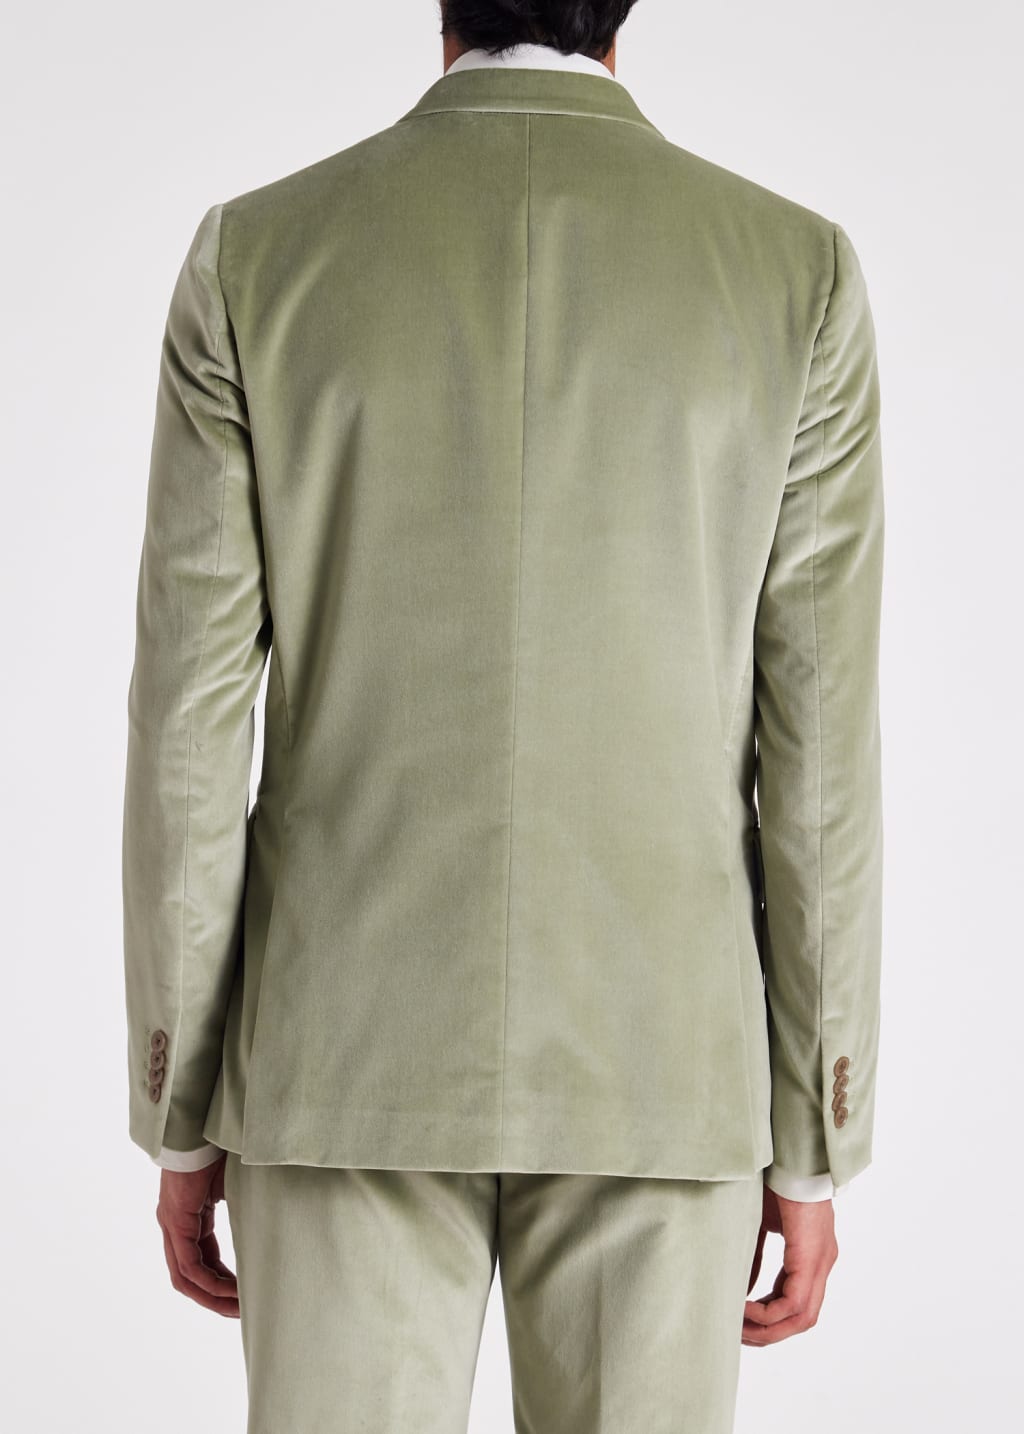 Model View - The Soho - Tailored-Fit Pistachio Velvet Suit by Paul Smith